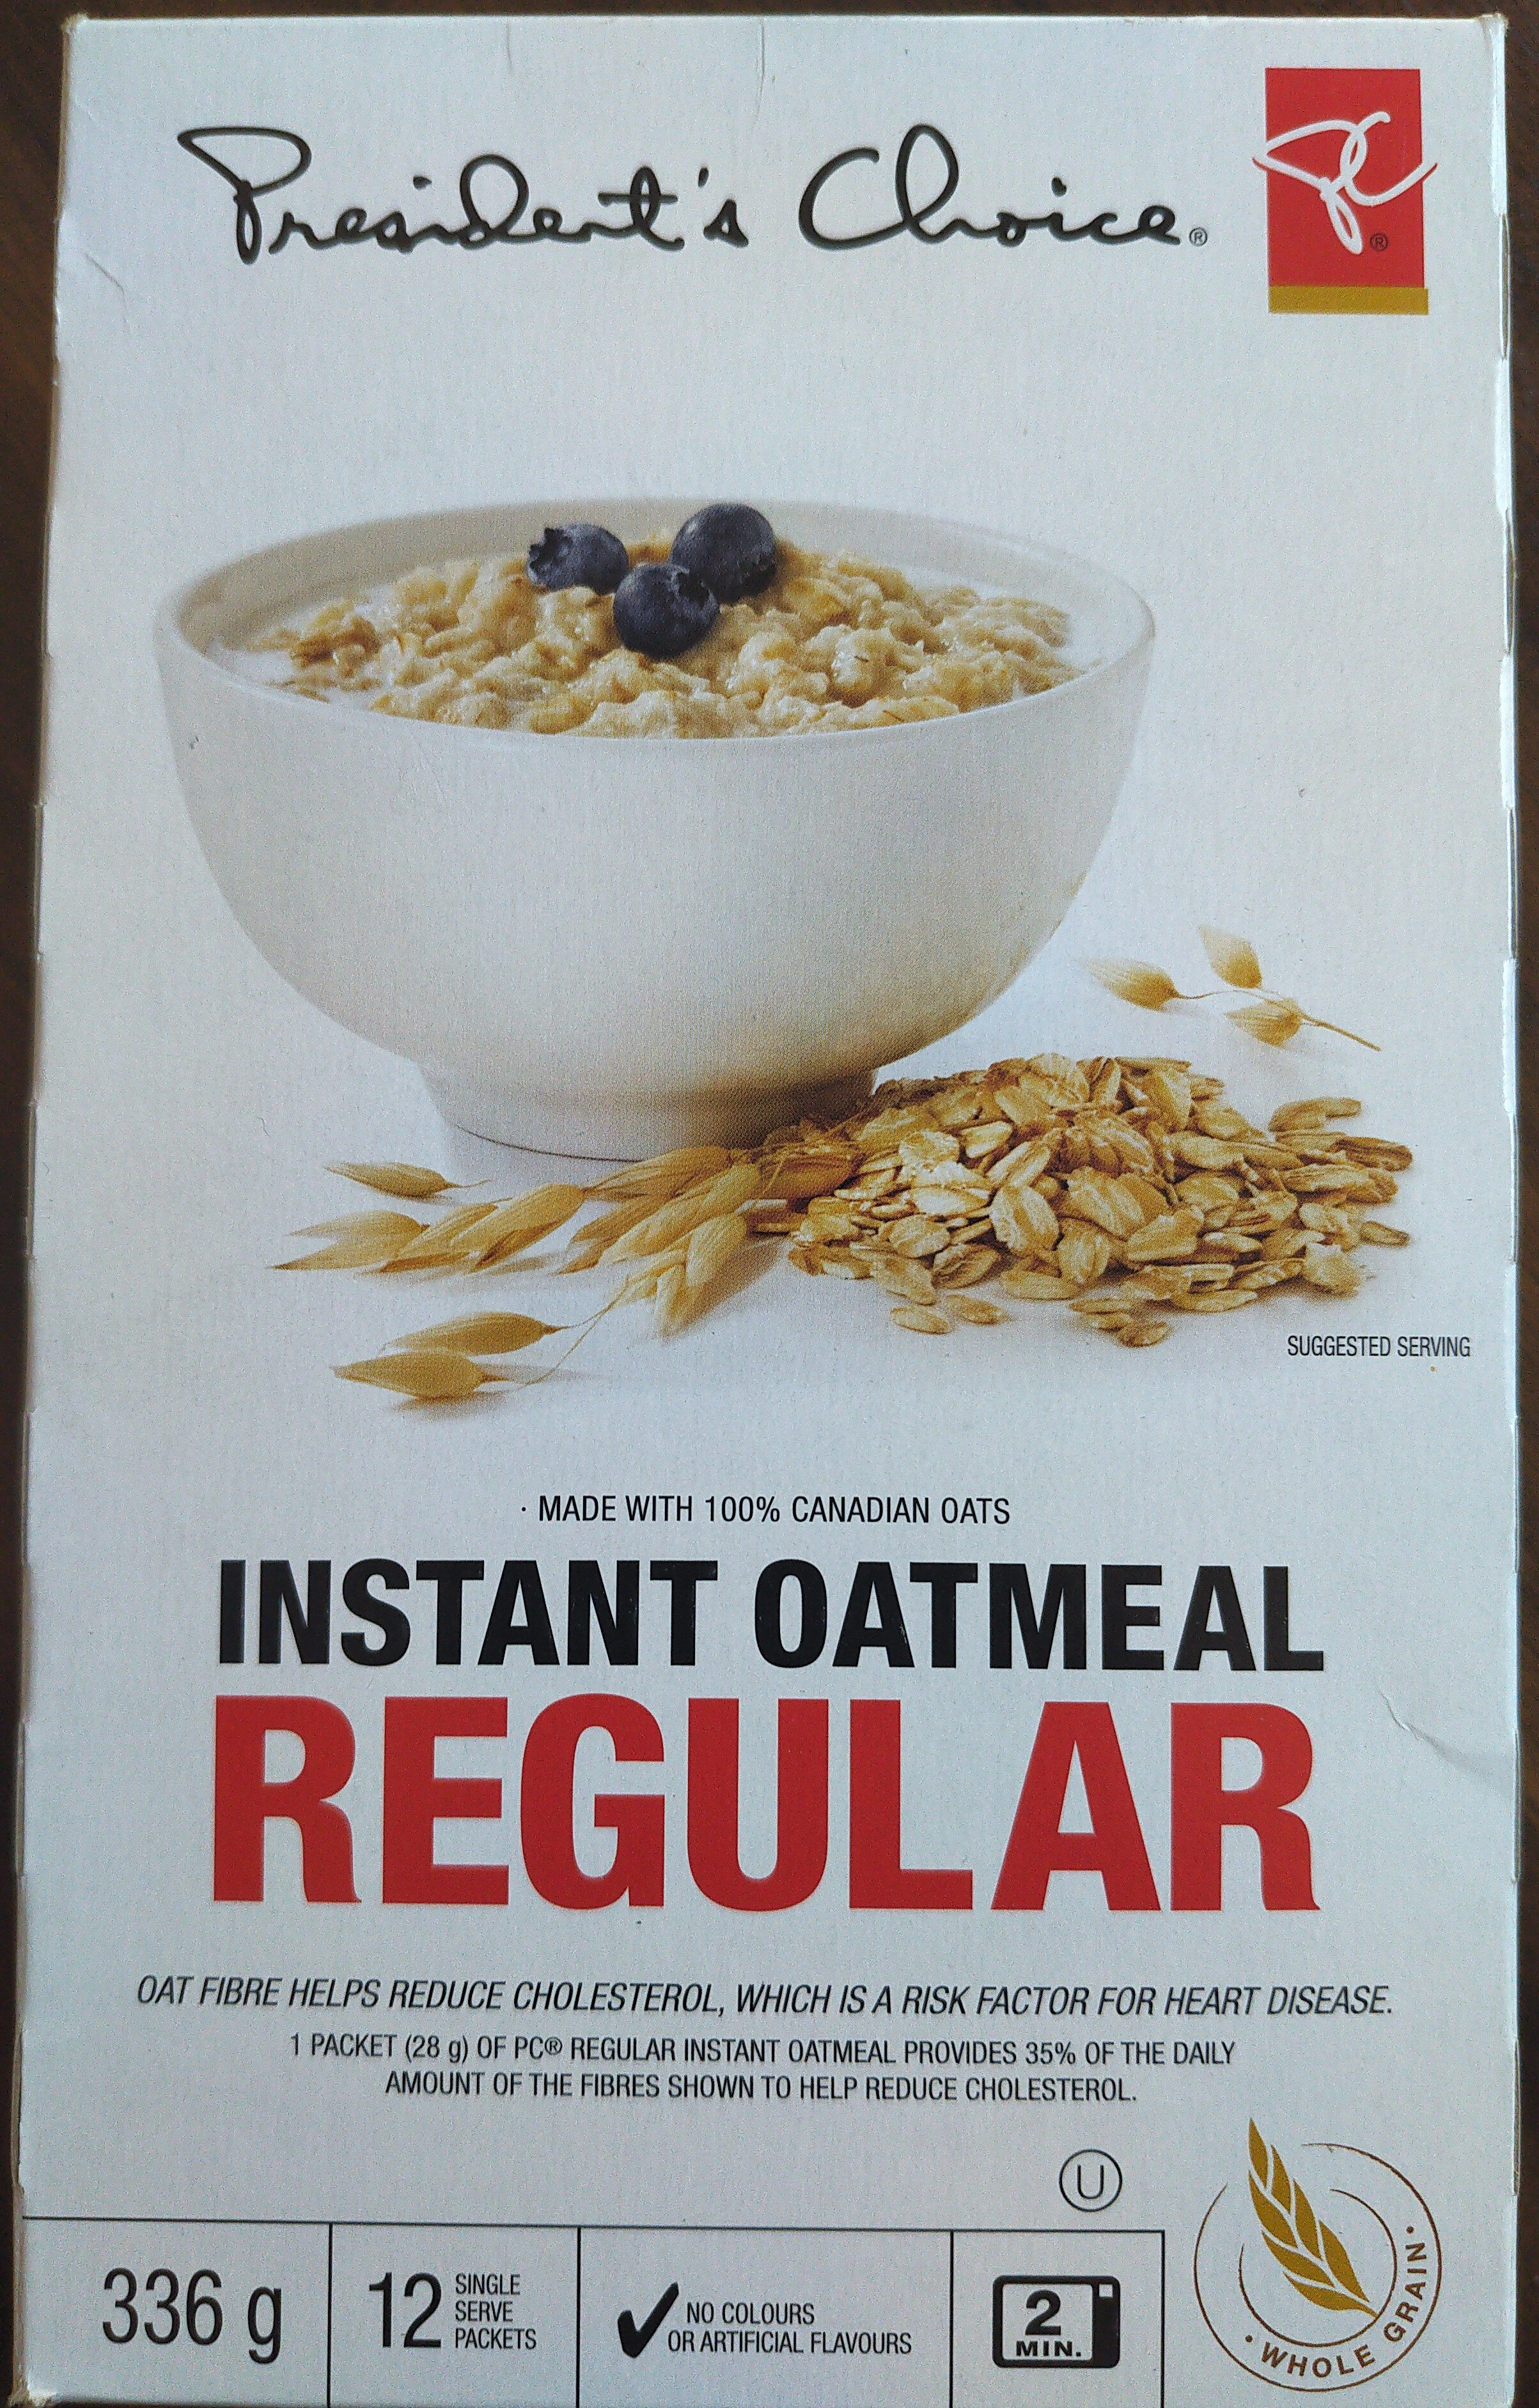 Regular Instant Oatmeal - Product